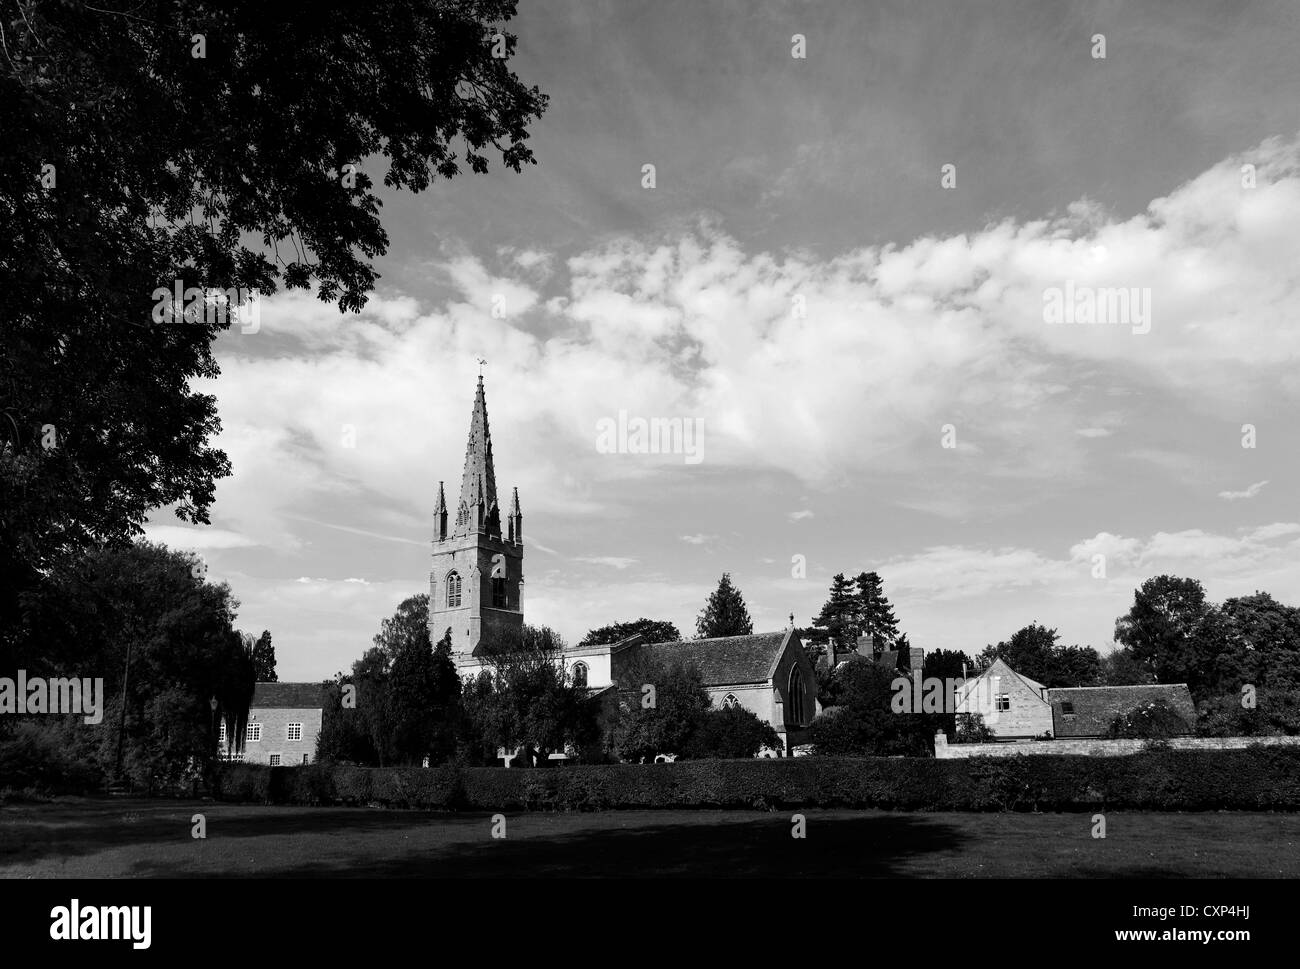 Anglican Church Black and White Stock Photos & Images - Alamy